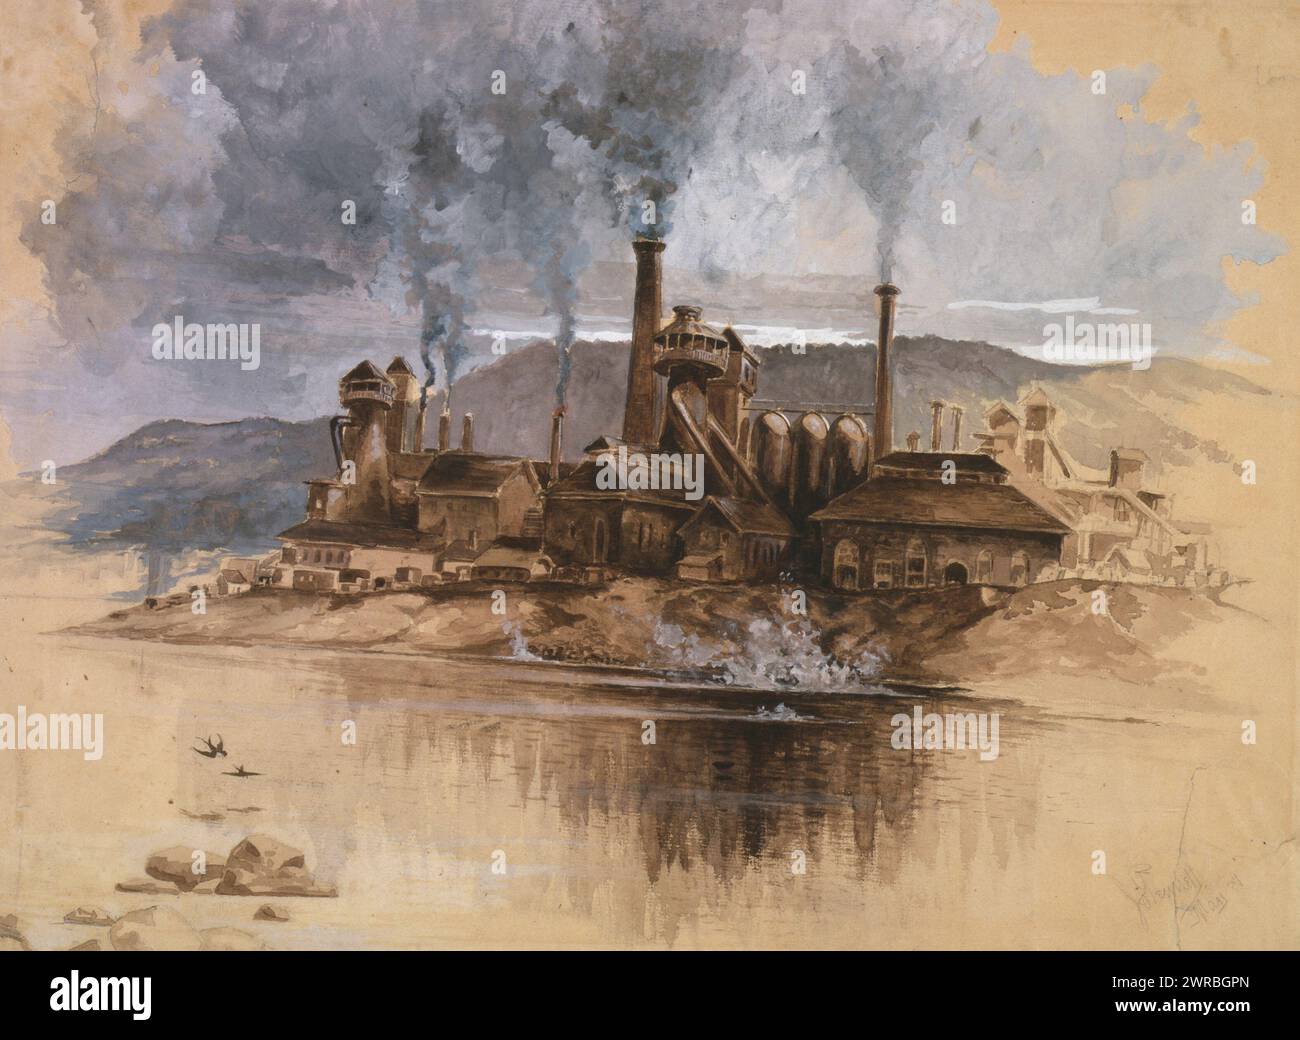 Bethlehem Steel Works, Pennsylvania, Bethlehem. As Wuerth described, 'Watercolor in sepia brown, white and gray, on buff paper. Signed May '81.' View across river to relatively small steel operation, various smokestacks, one blowing fire, smoky sky above, hills beyond., Pennell, Joseph, 1857-1926, artist, 1881 May., Bethlehem Iron Company, Buildings, 1880-1890, Drawings, Color, 1880-1890., Watercolors, 1880-1890, Drawings, Color, 1880-1890, 1 drawing on cream paper: watercolor, wash, gouache, sheet 35.3 x 47.8 cm Stock Photo